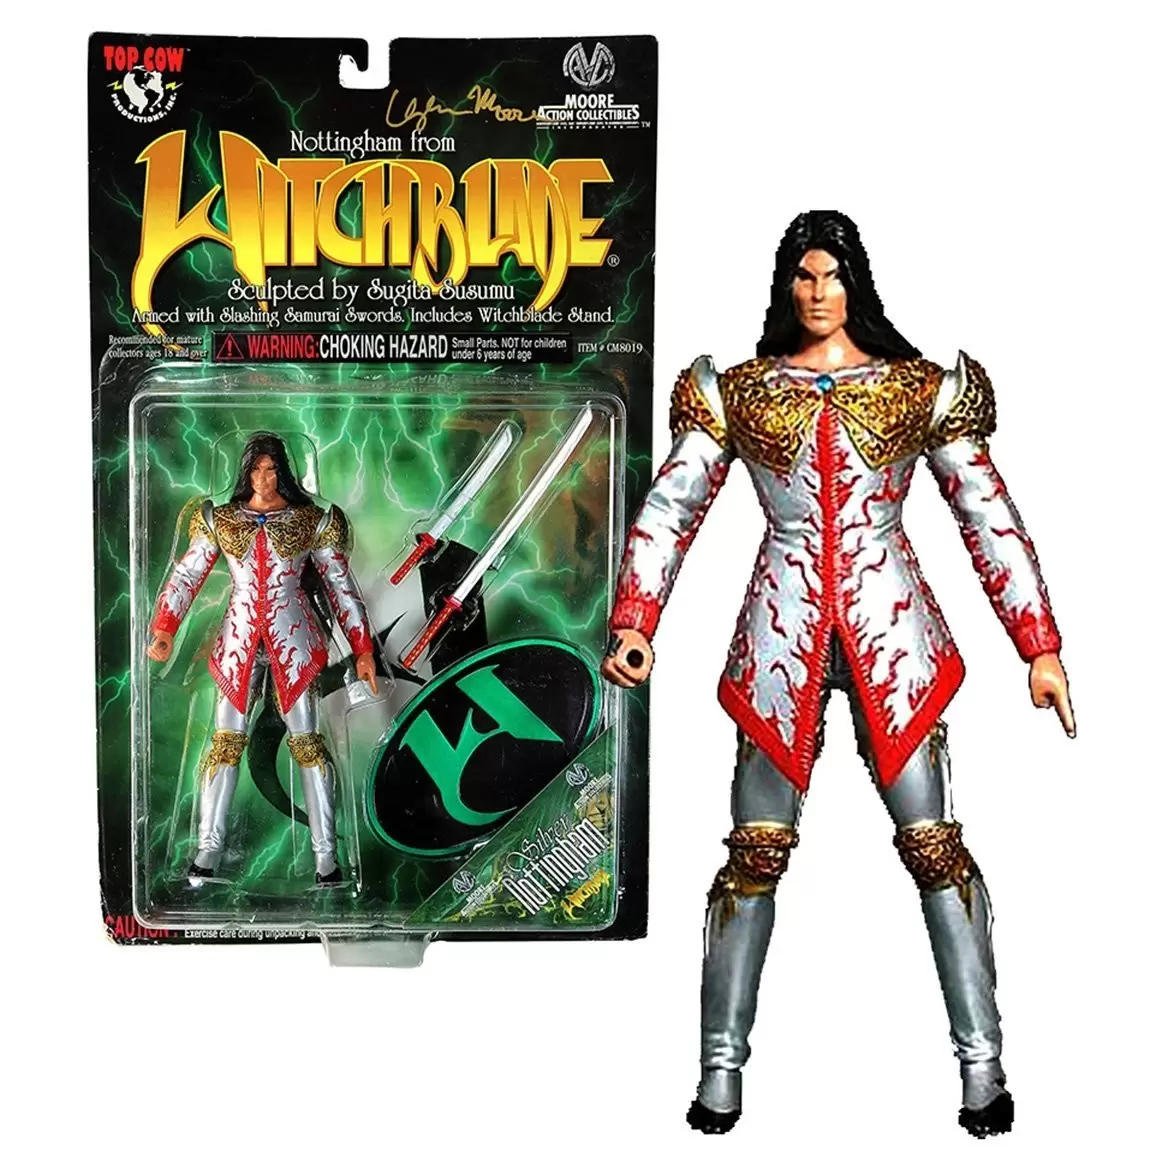 Moore Action Collectibles - Nottingham from Witchblade Silver Version